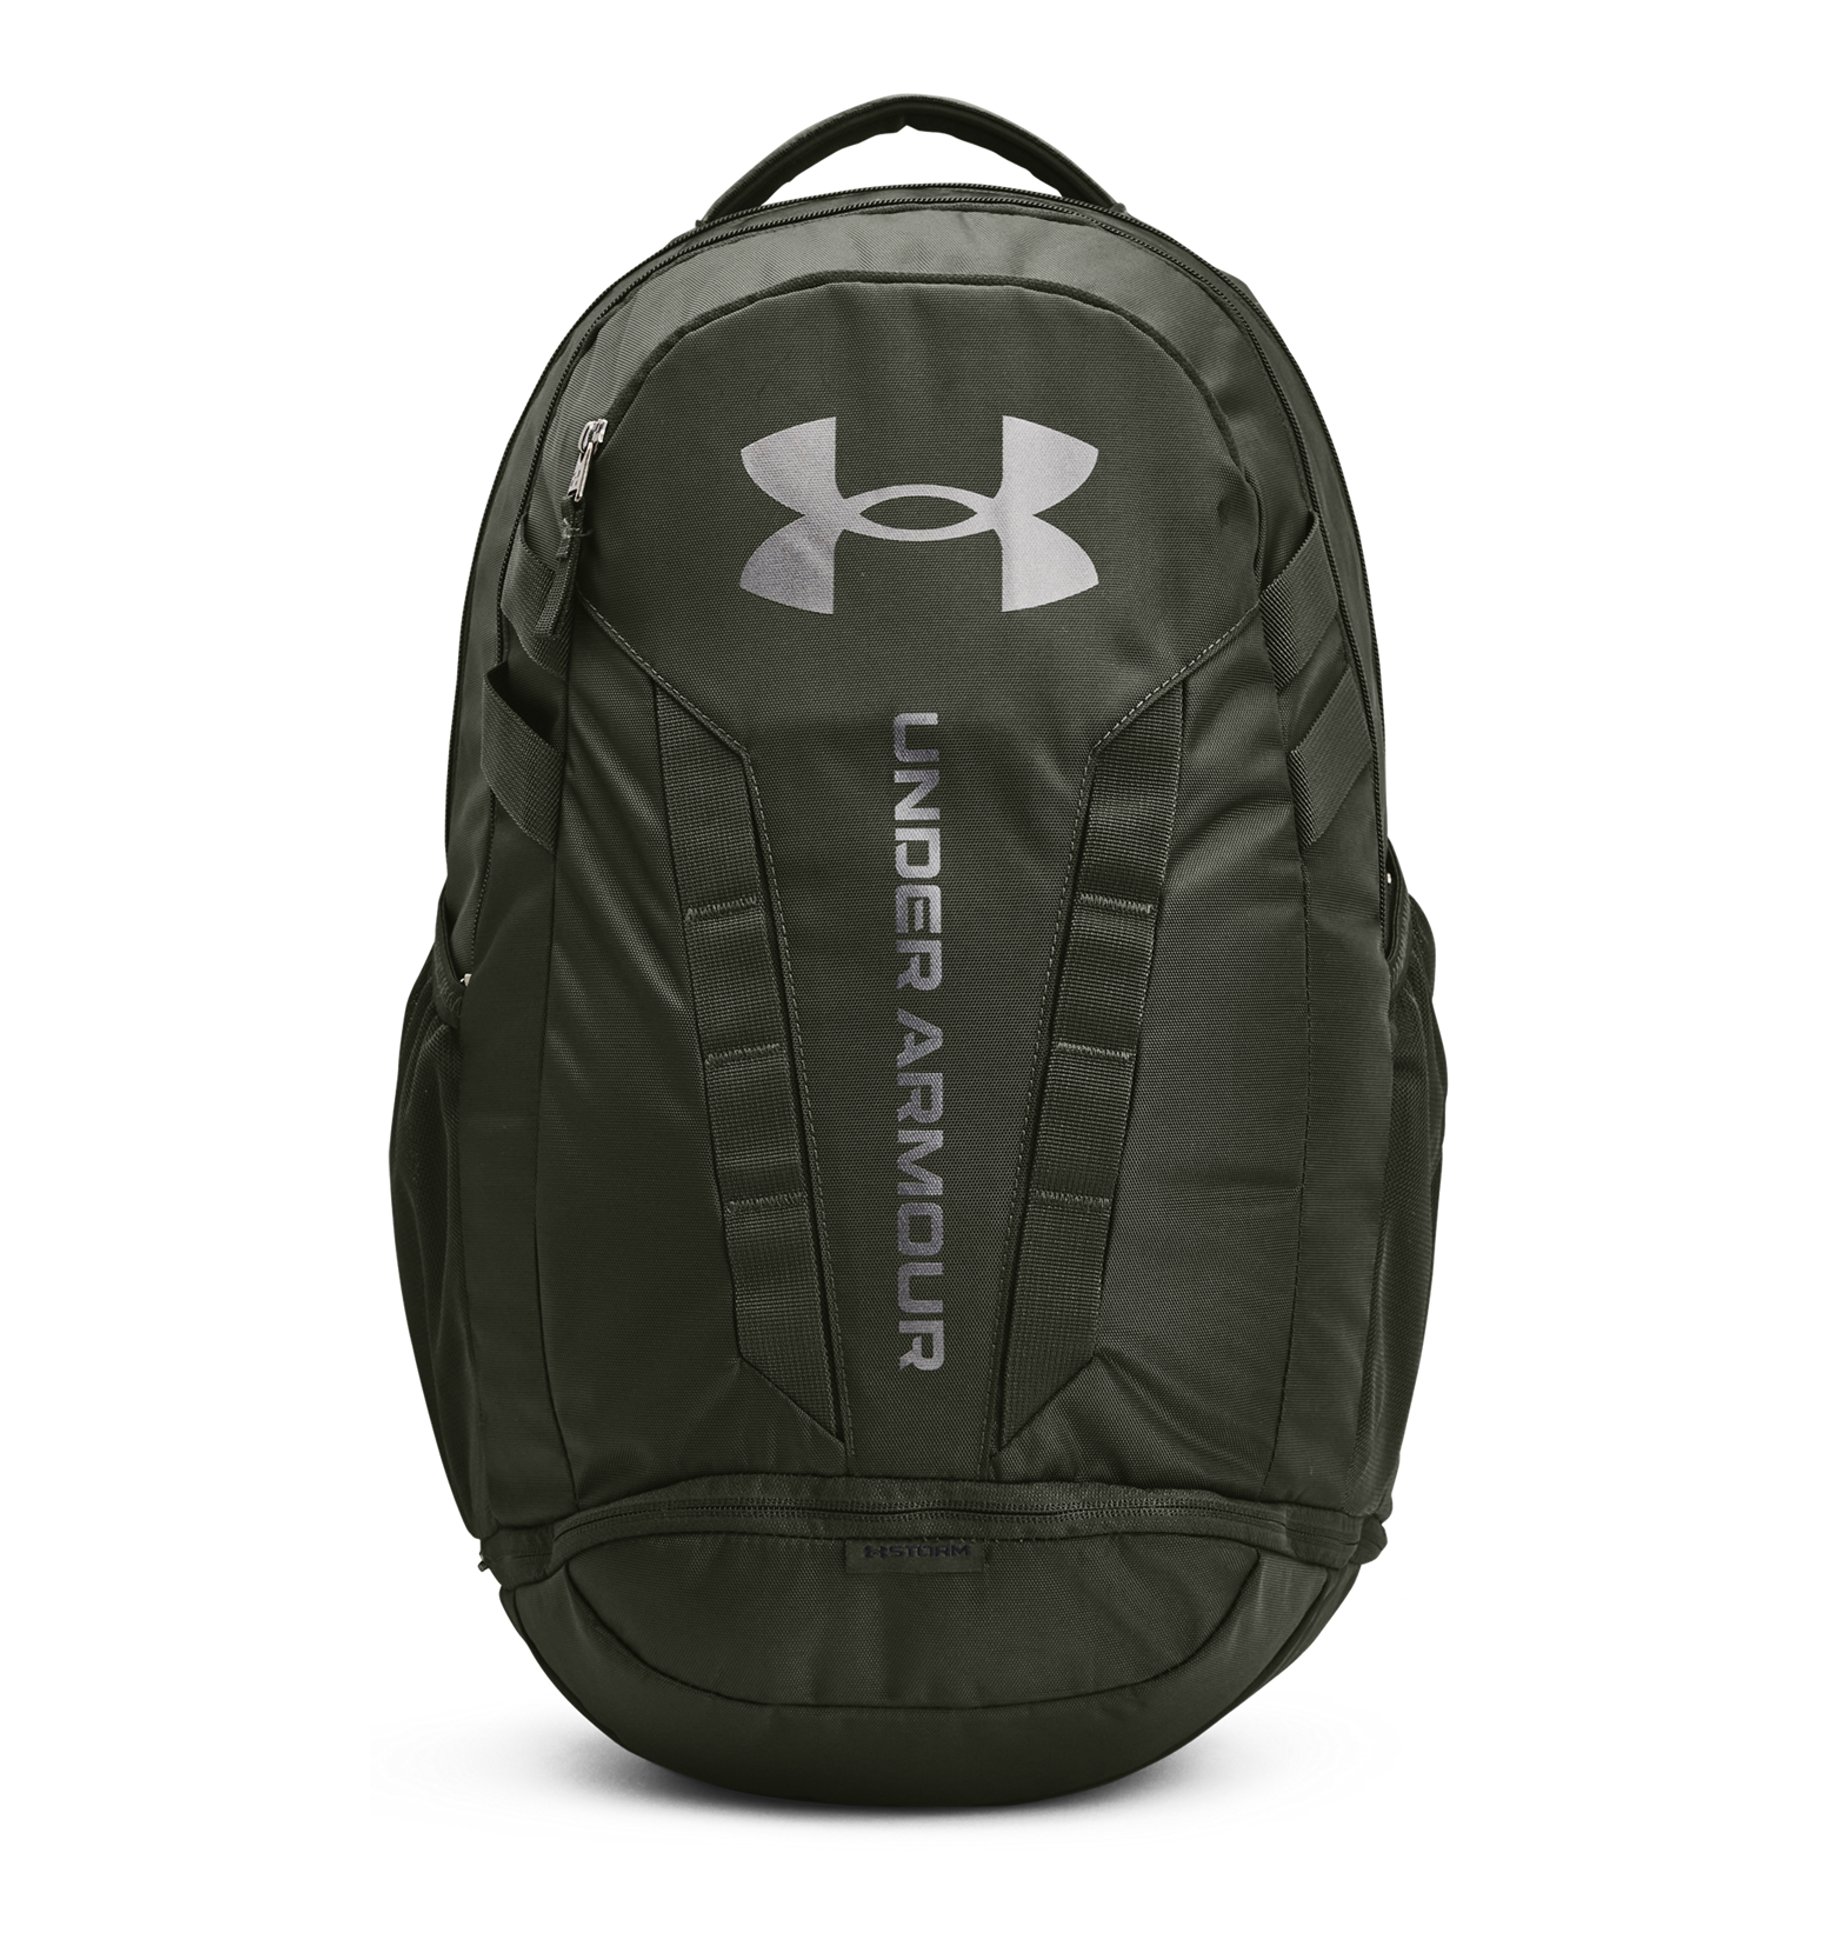 Convocar Trampas estoy enfermo Under Armour Ua Hustle 5.0 Backpack 1361176312OSFA | w/ Free Shipping and  Handling